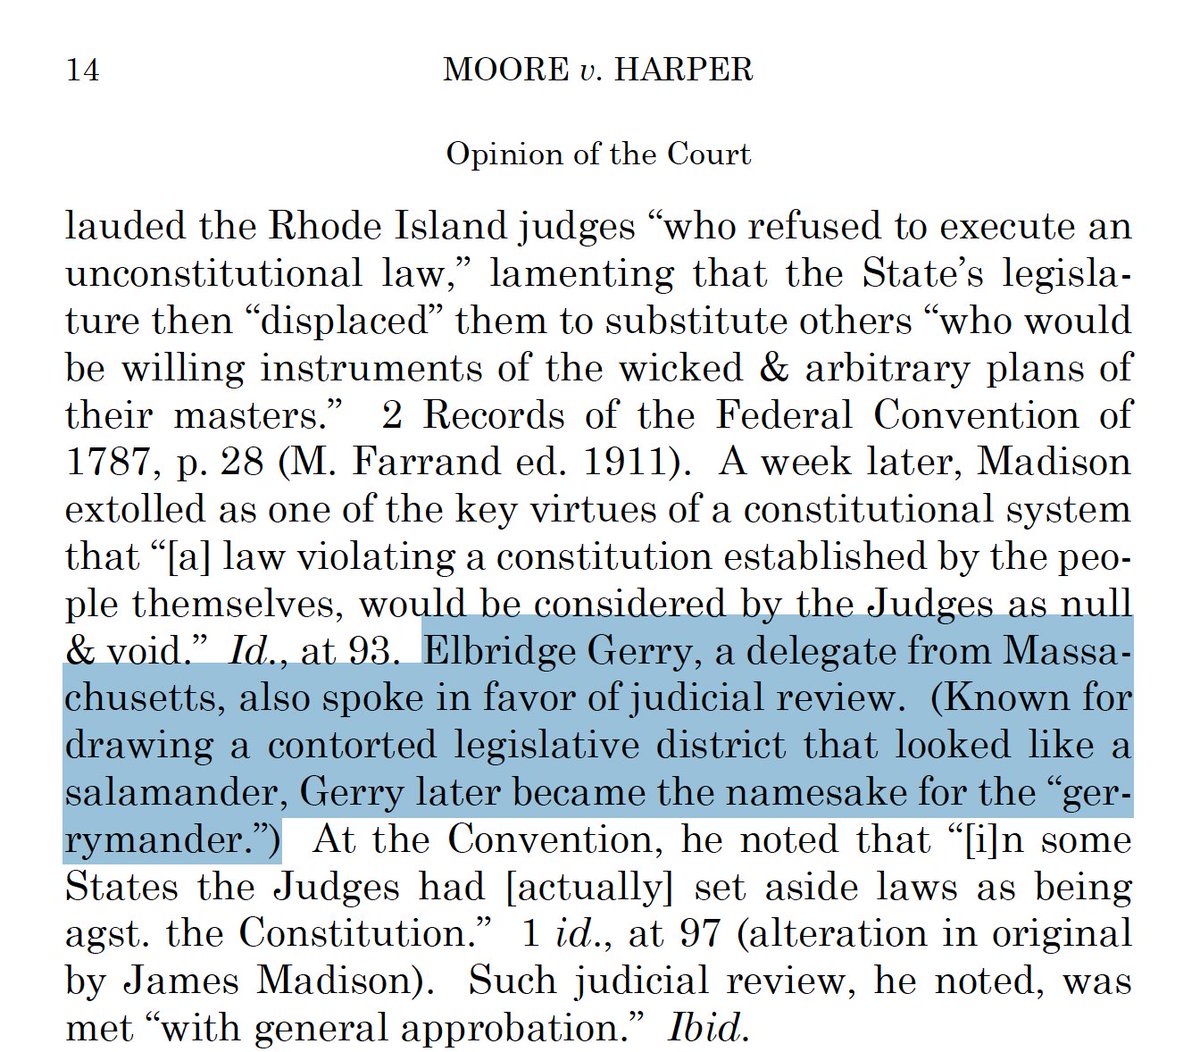 Not to look a gift horse in the mouth or anything, but really Chief Justice Roberts, *now* you happily cite Elbridge Gerry?! #StillBitterAboutRucho #MoorevHarper